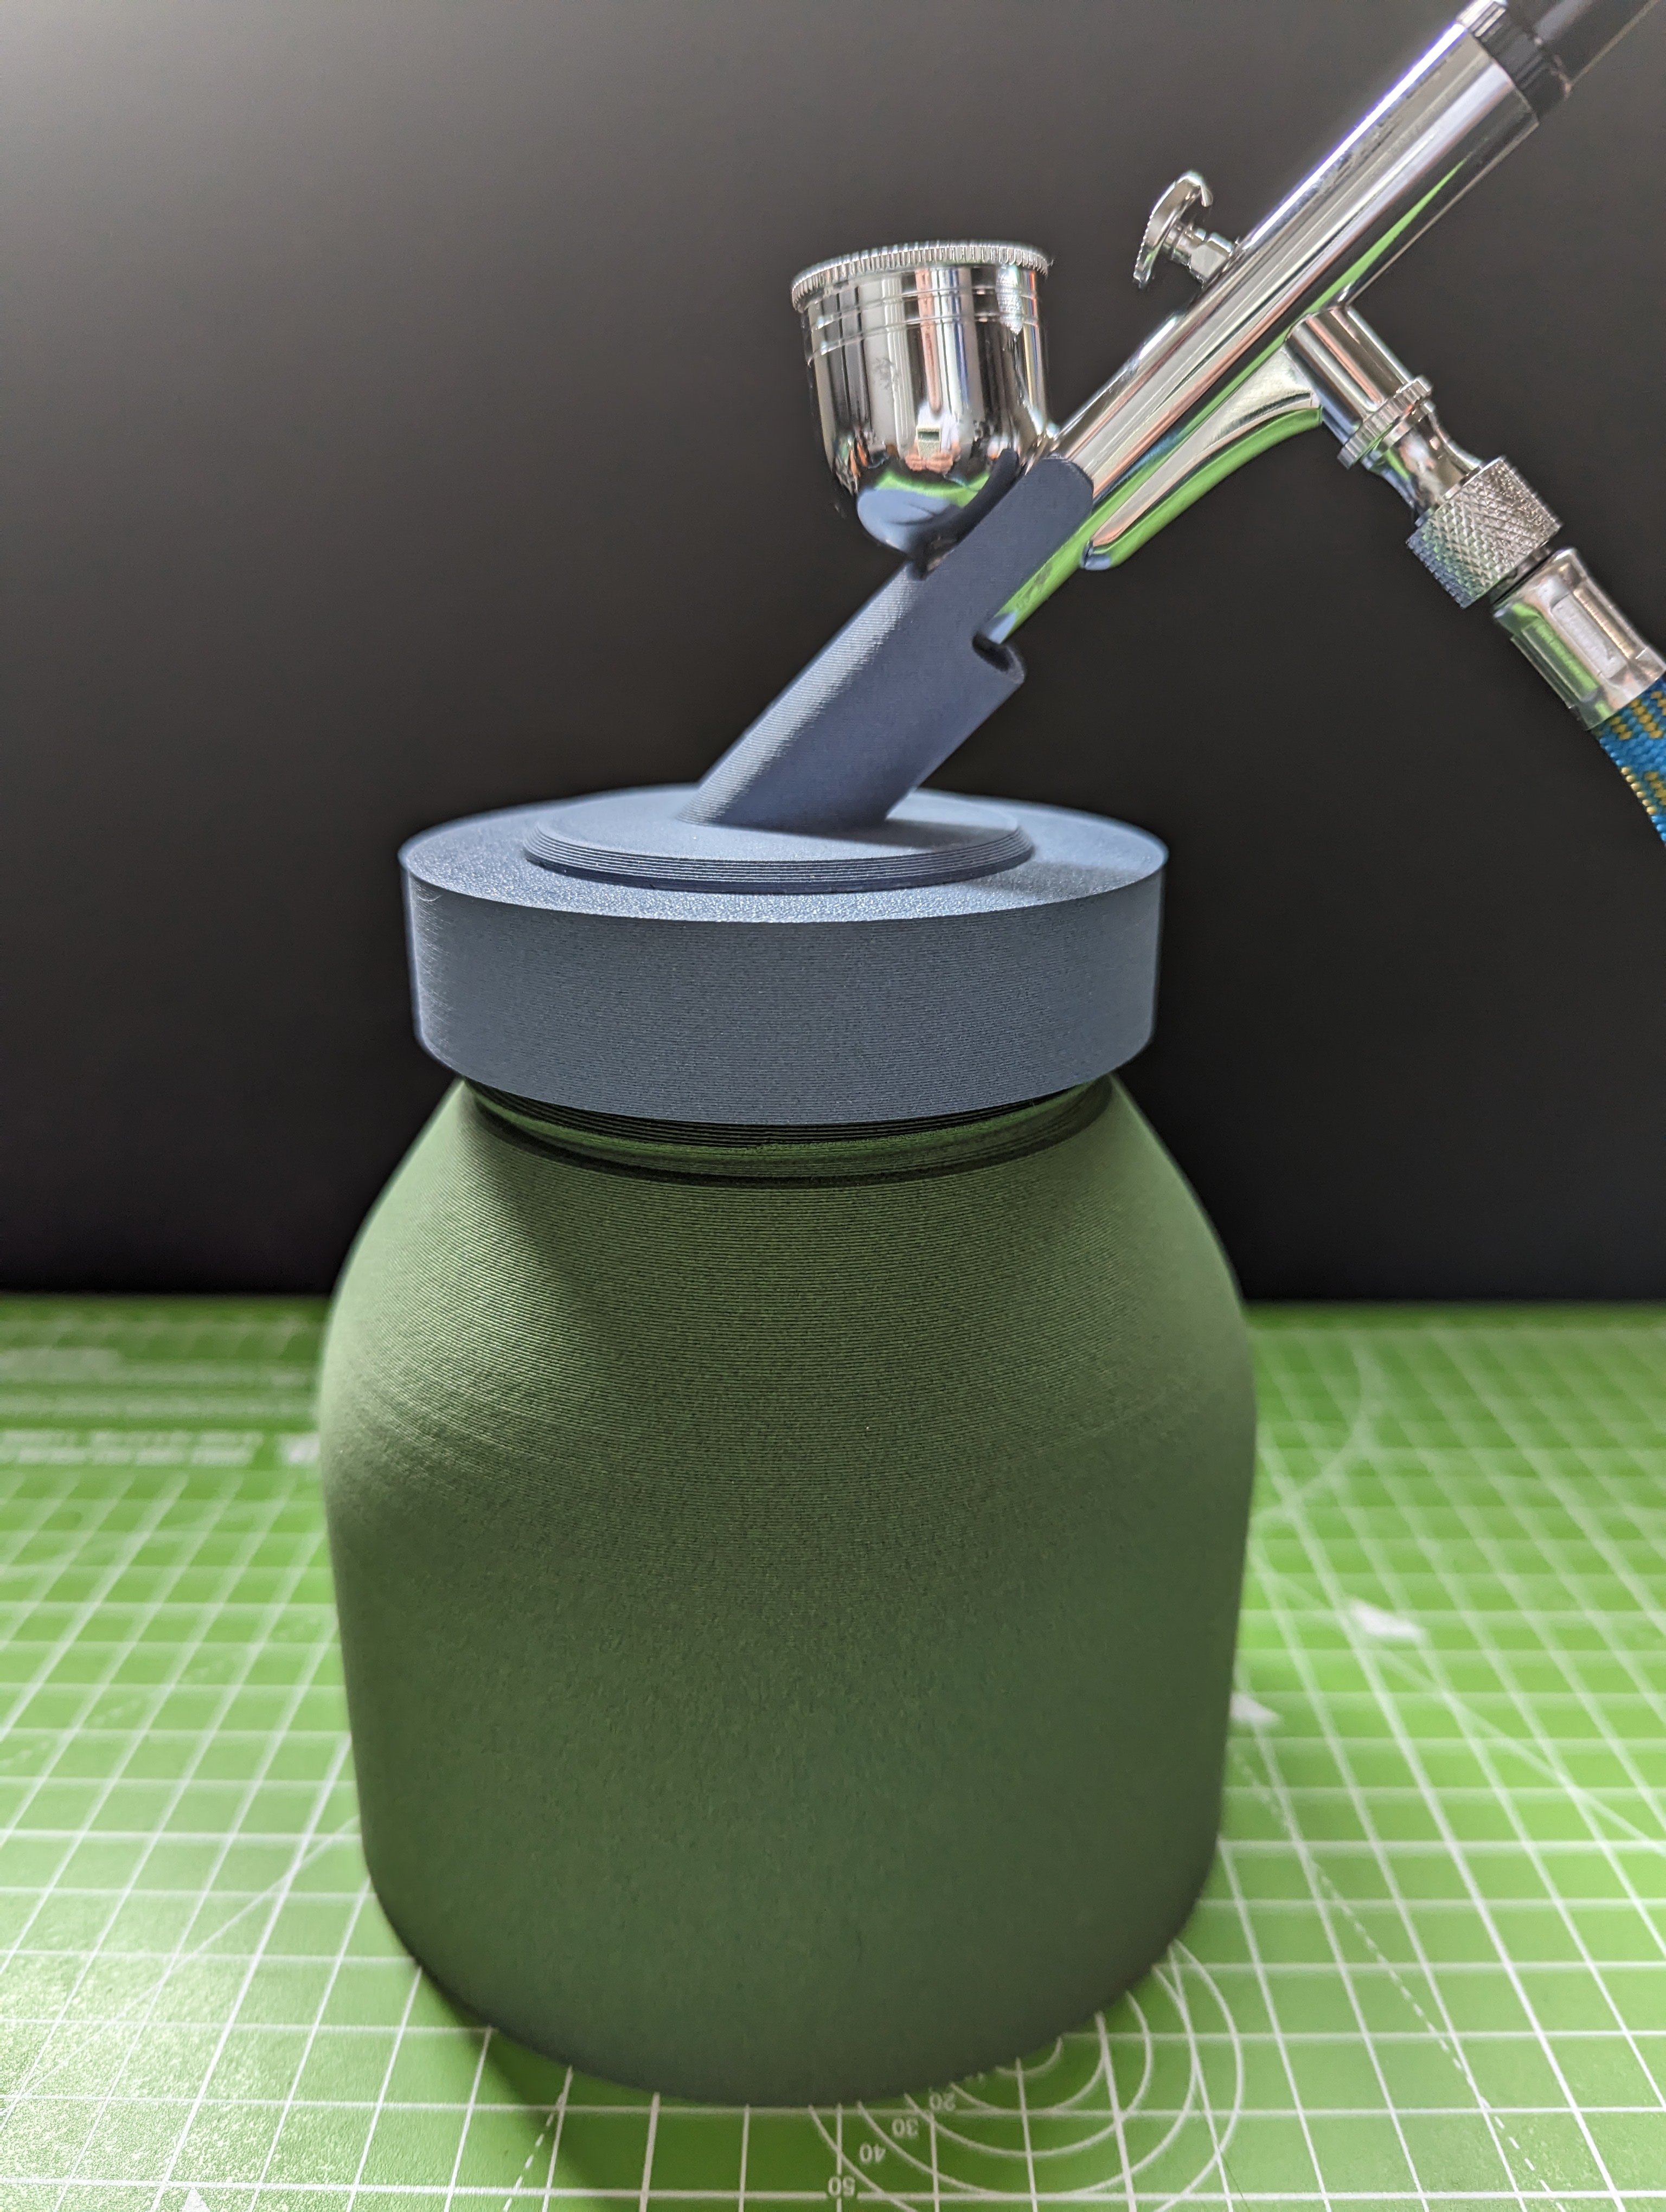 Airbrush Cleaning Pot by Ghostdogs